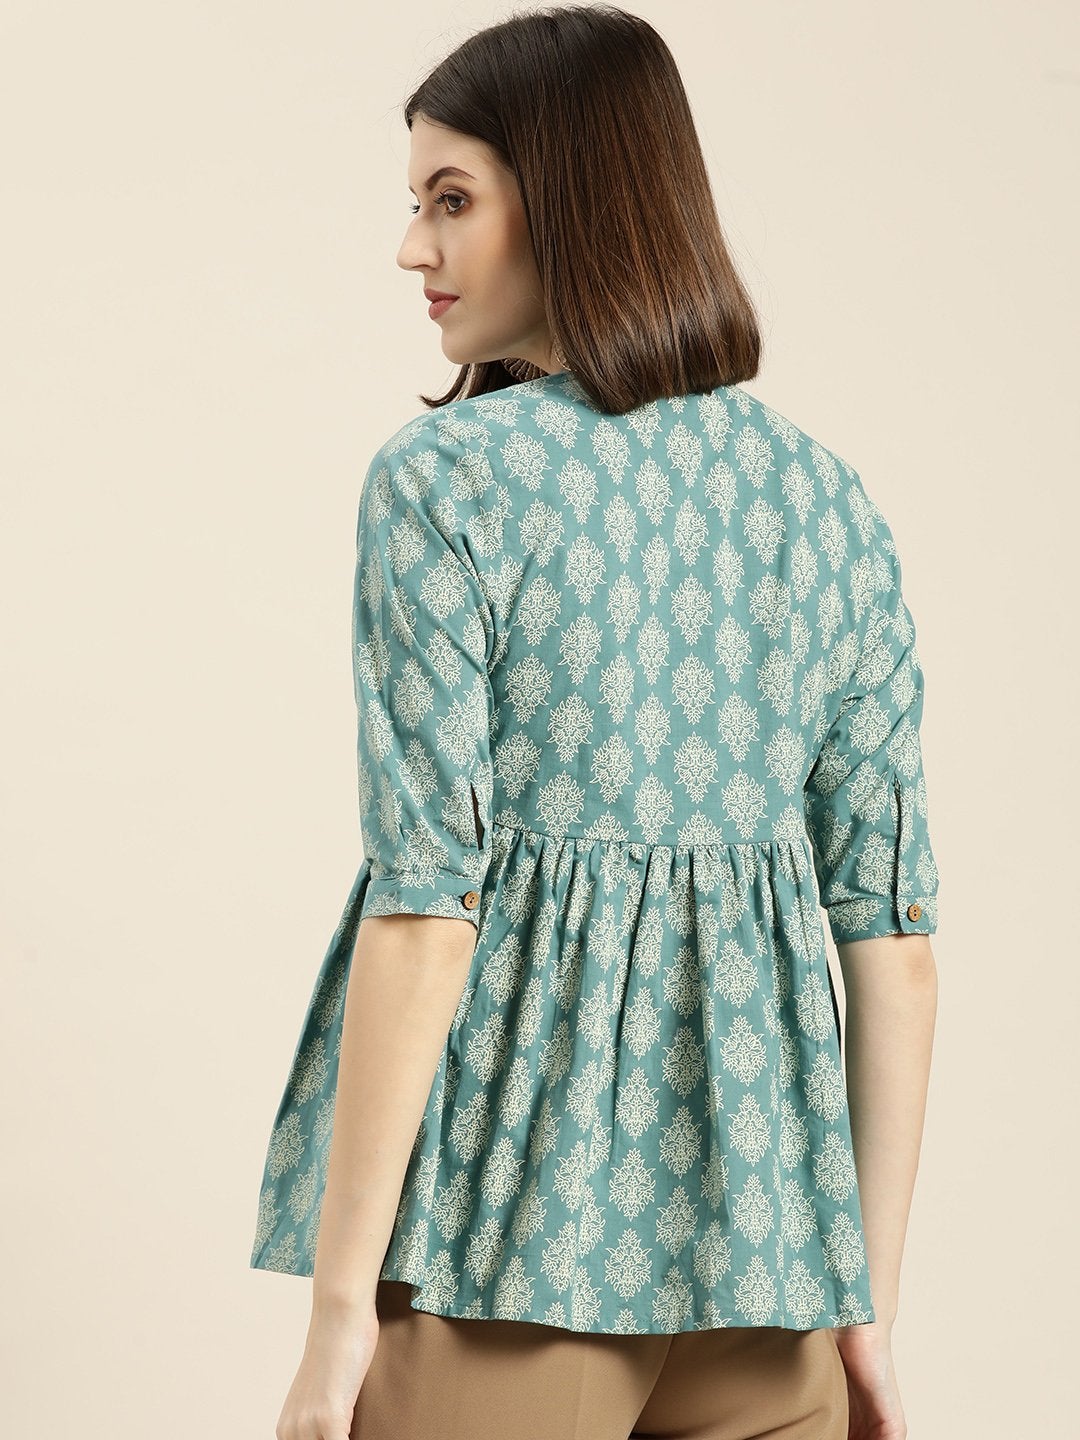 Women's Teal Printed Front Button Gathered Top - SASSAFRAS